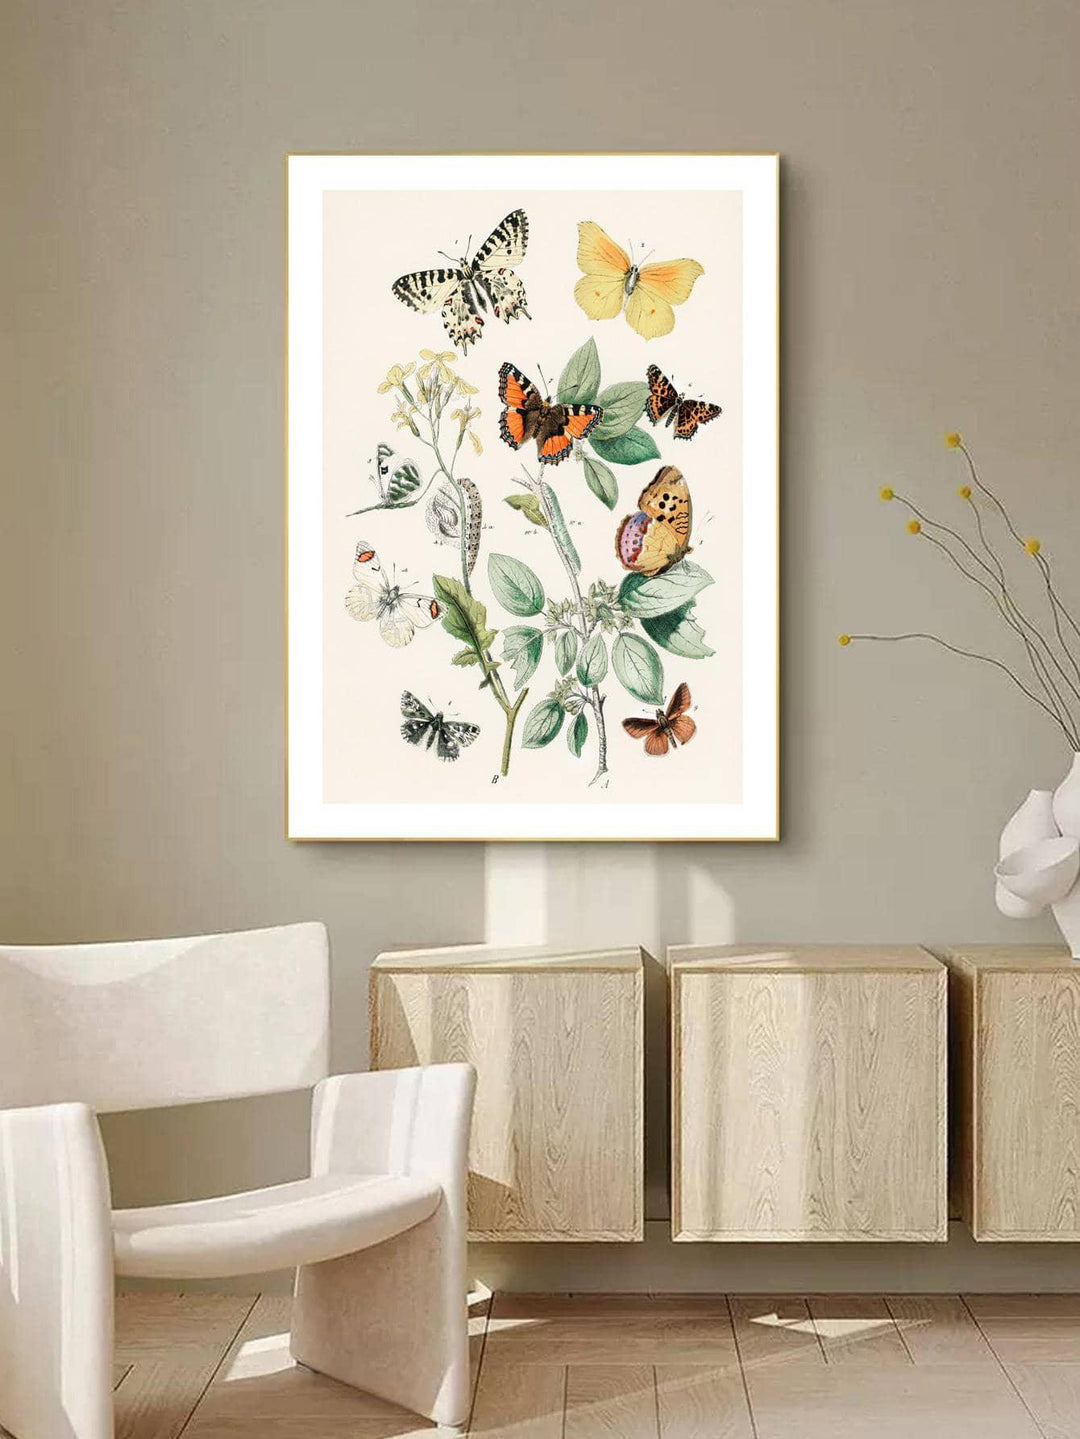 Butterfly Pattern Framed Painting Vintage Chemical Fiber Wall Art Prints For Home Decor - Brand My Case